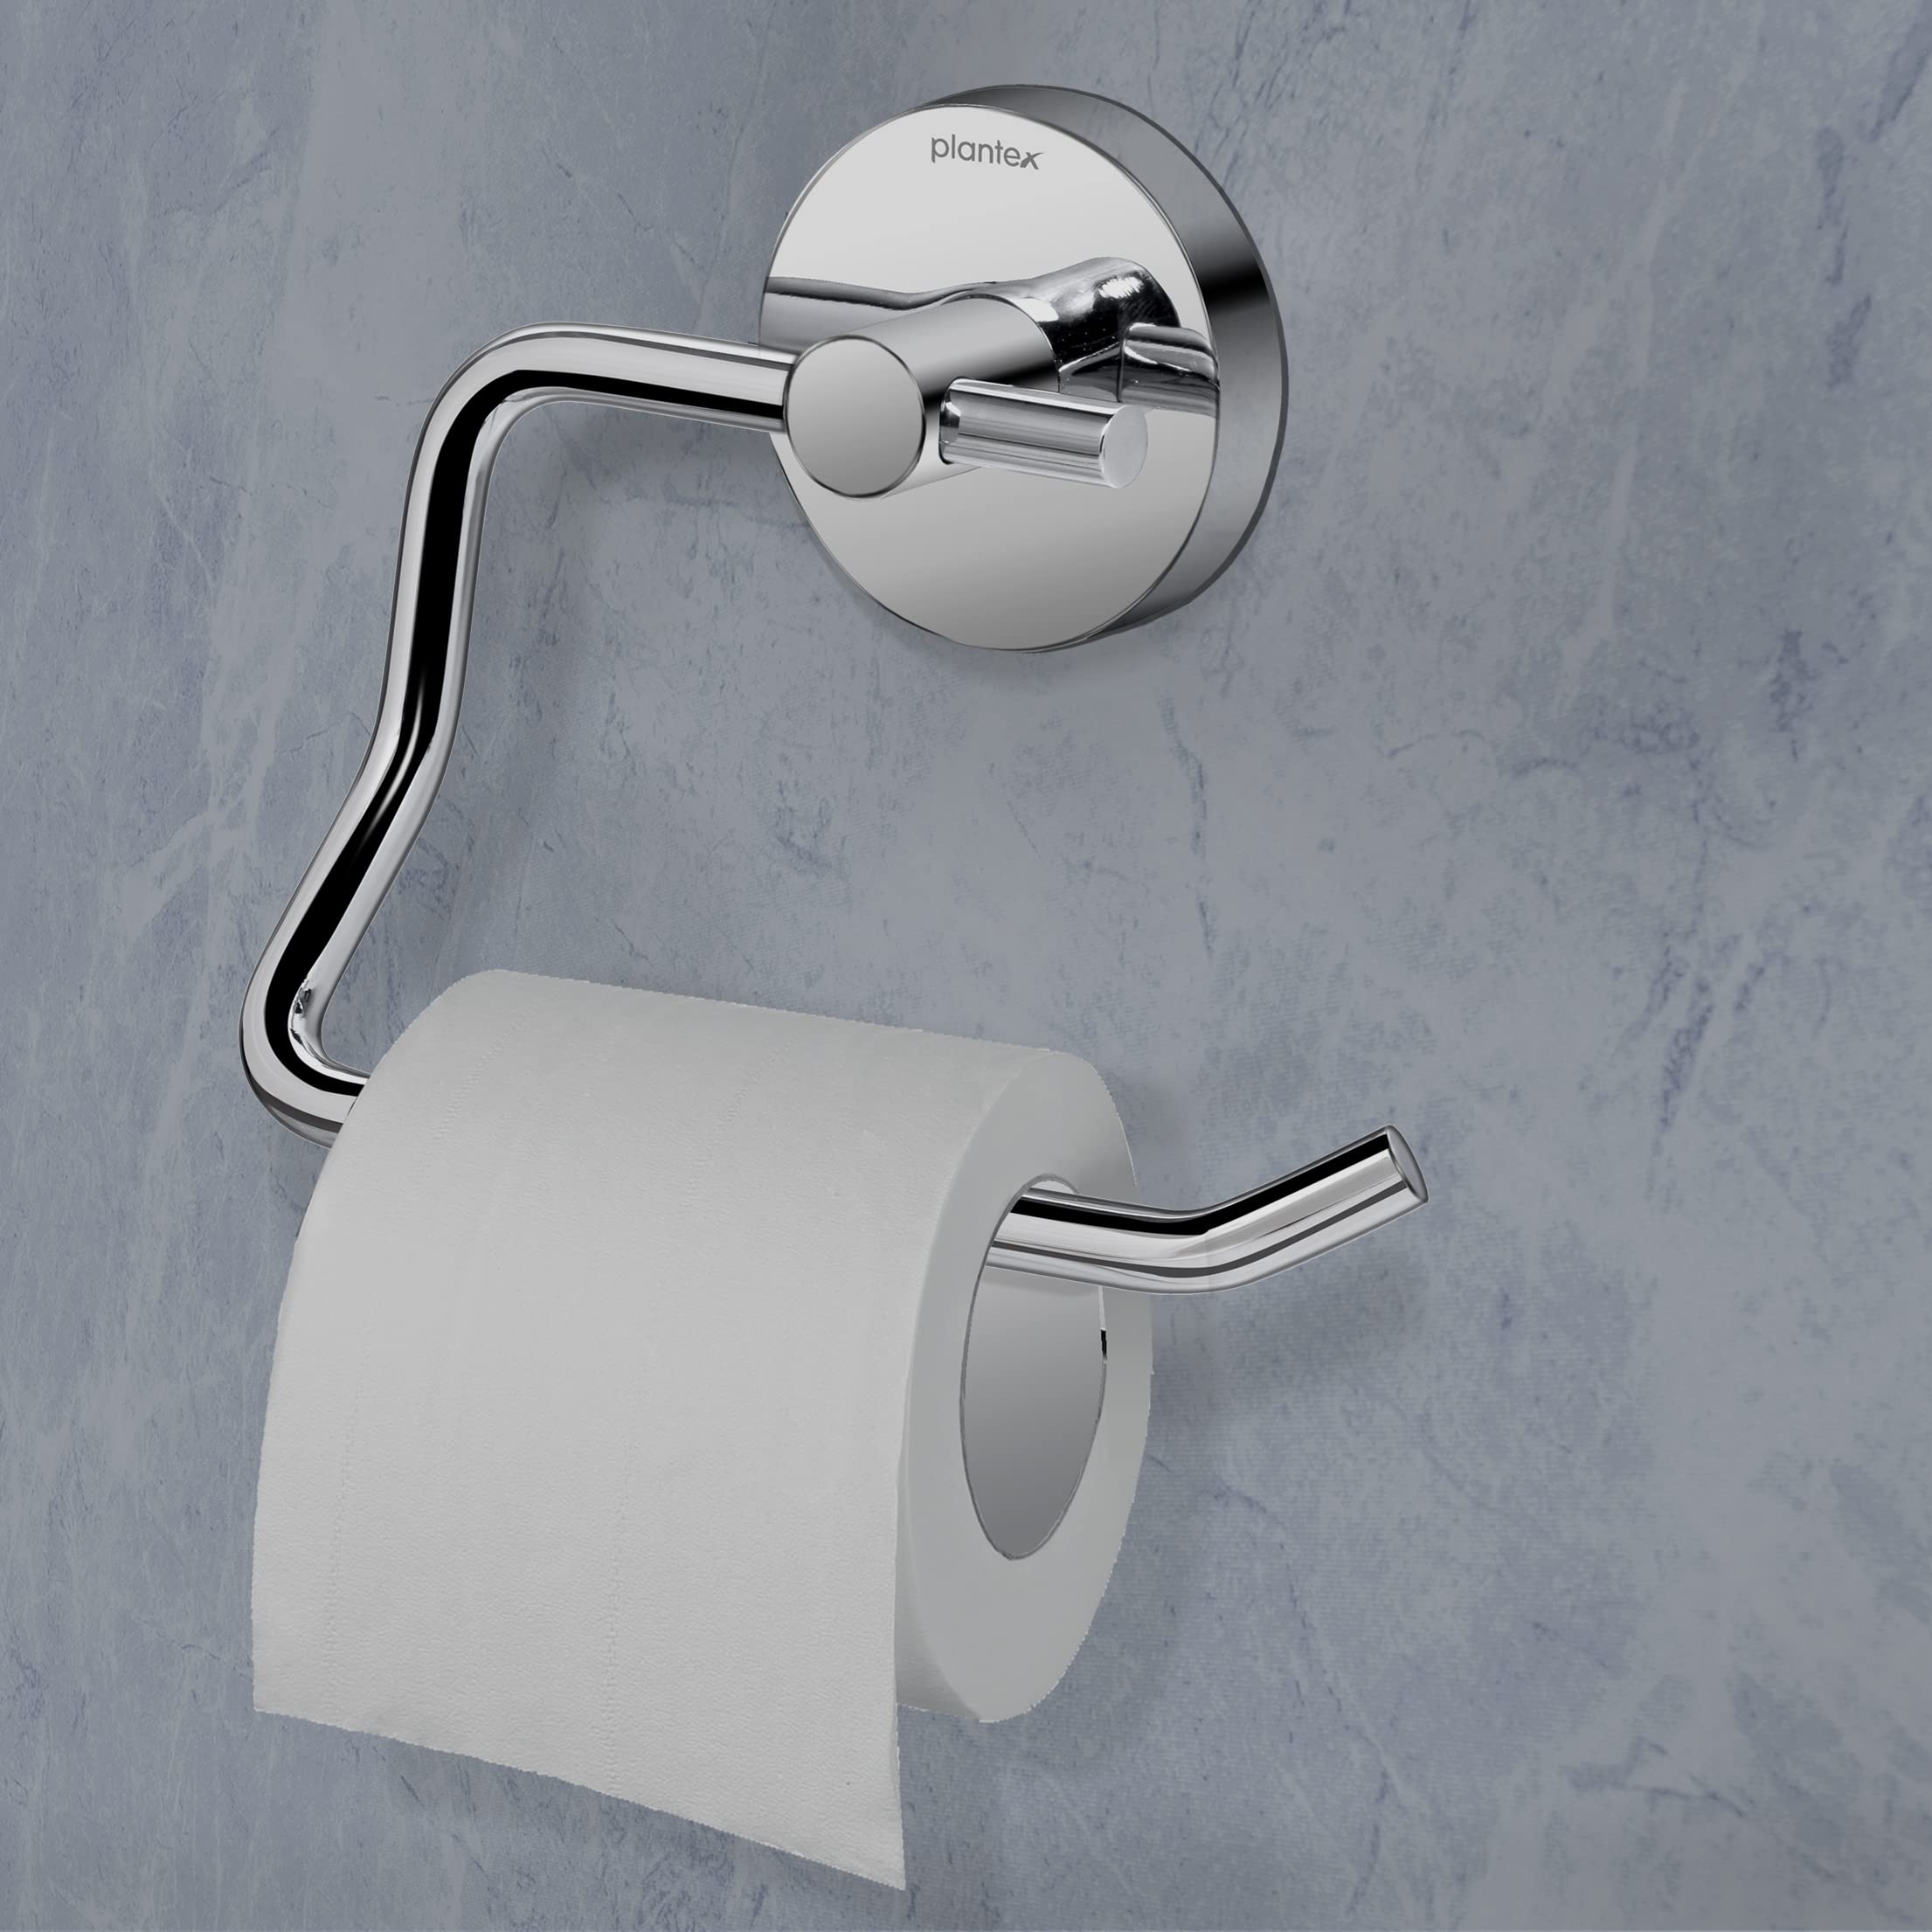 Plantex Fully Brass Tissue/Toilet Paper roll Holder Stand for The washroom (Shiny Silver)